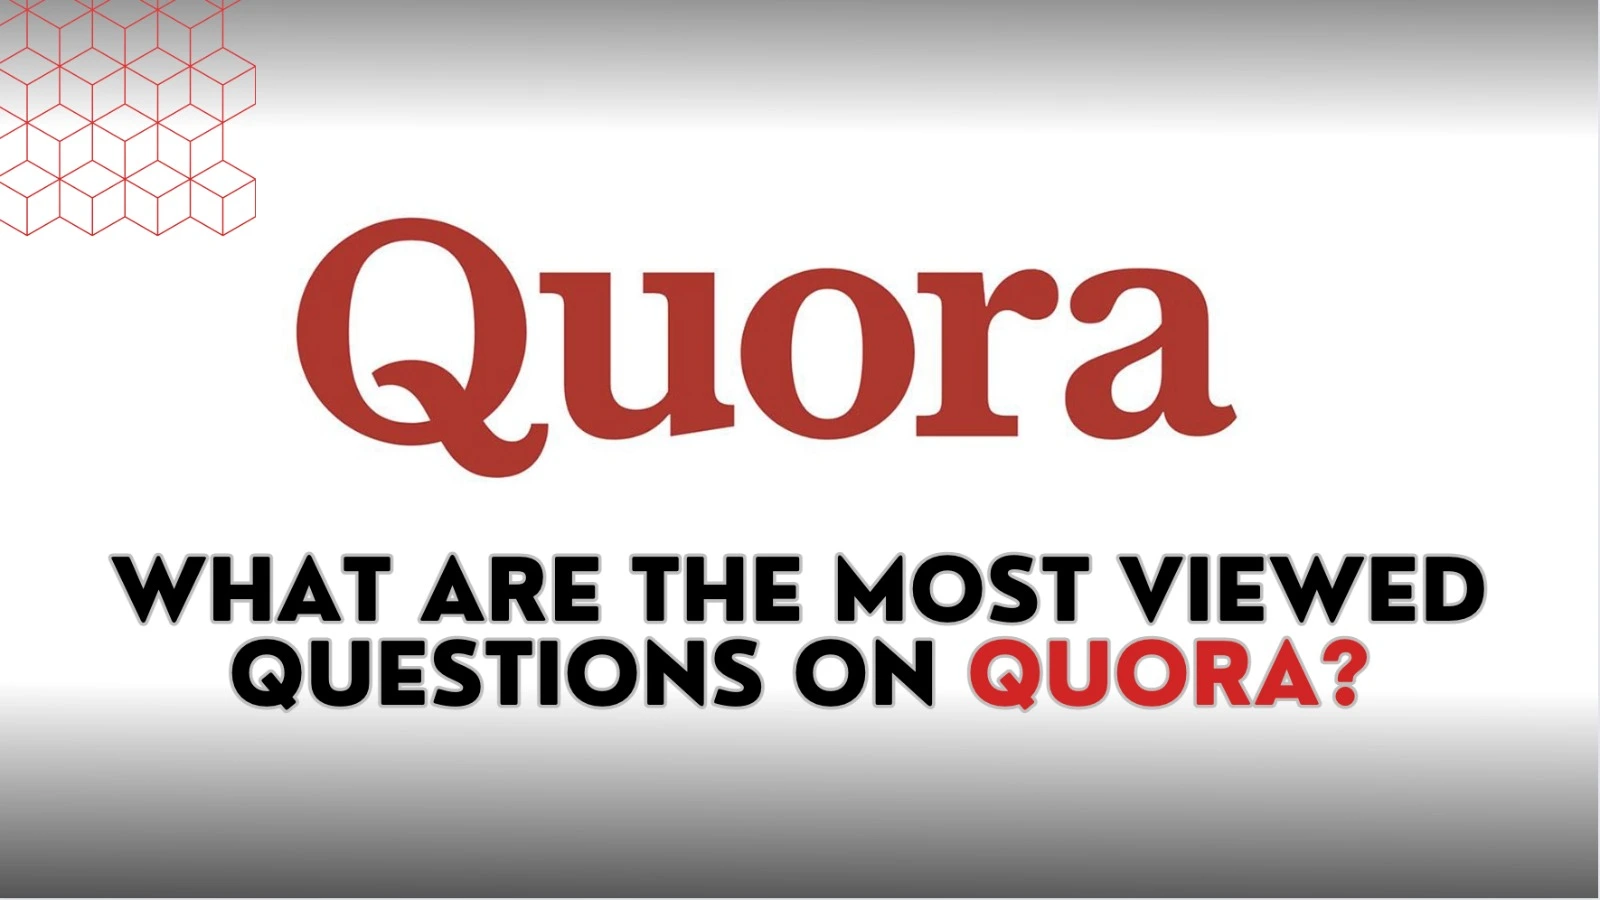 Most Viewed Questions on Quora